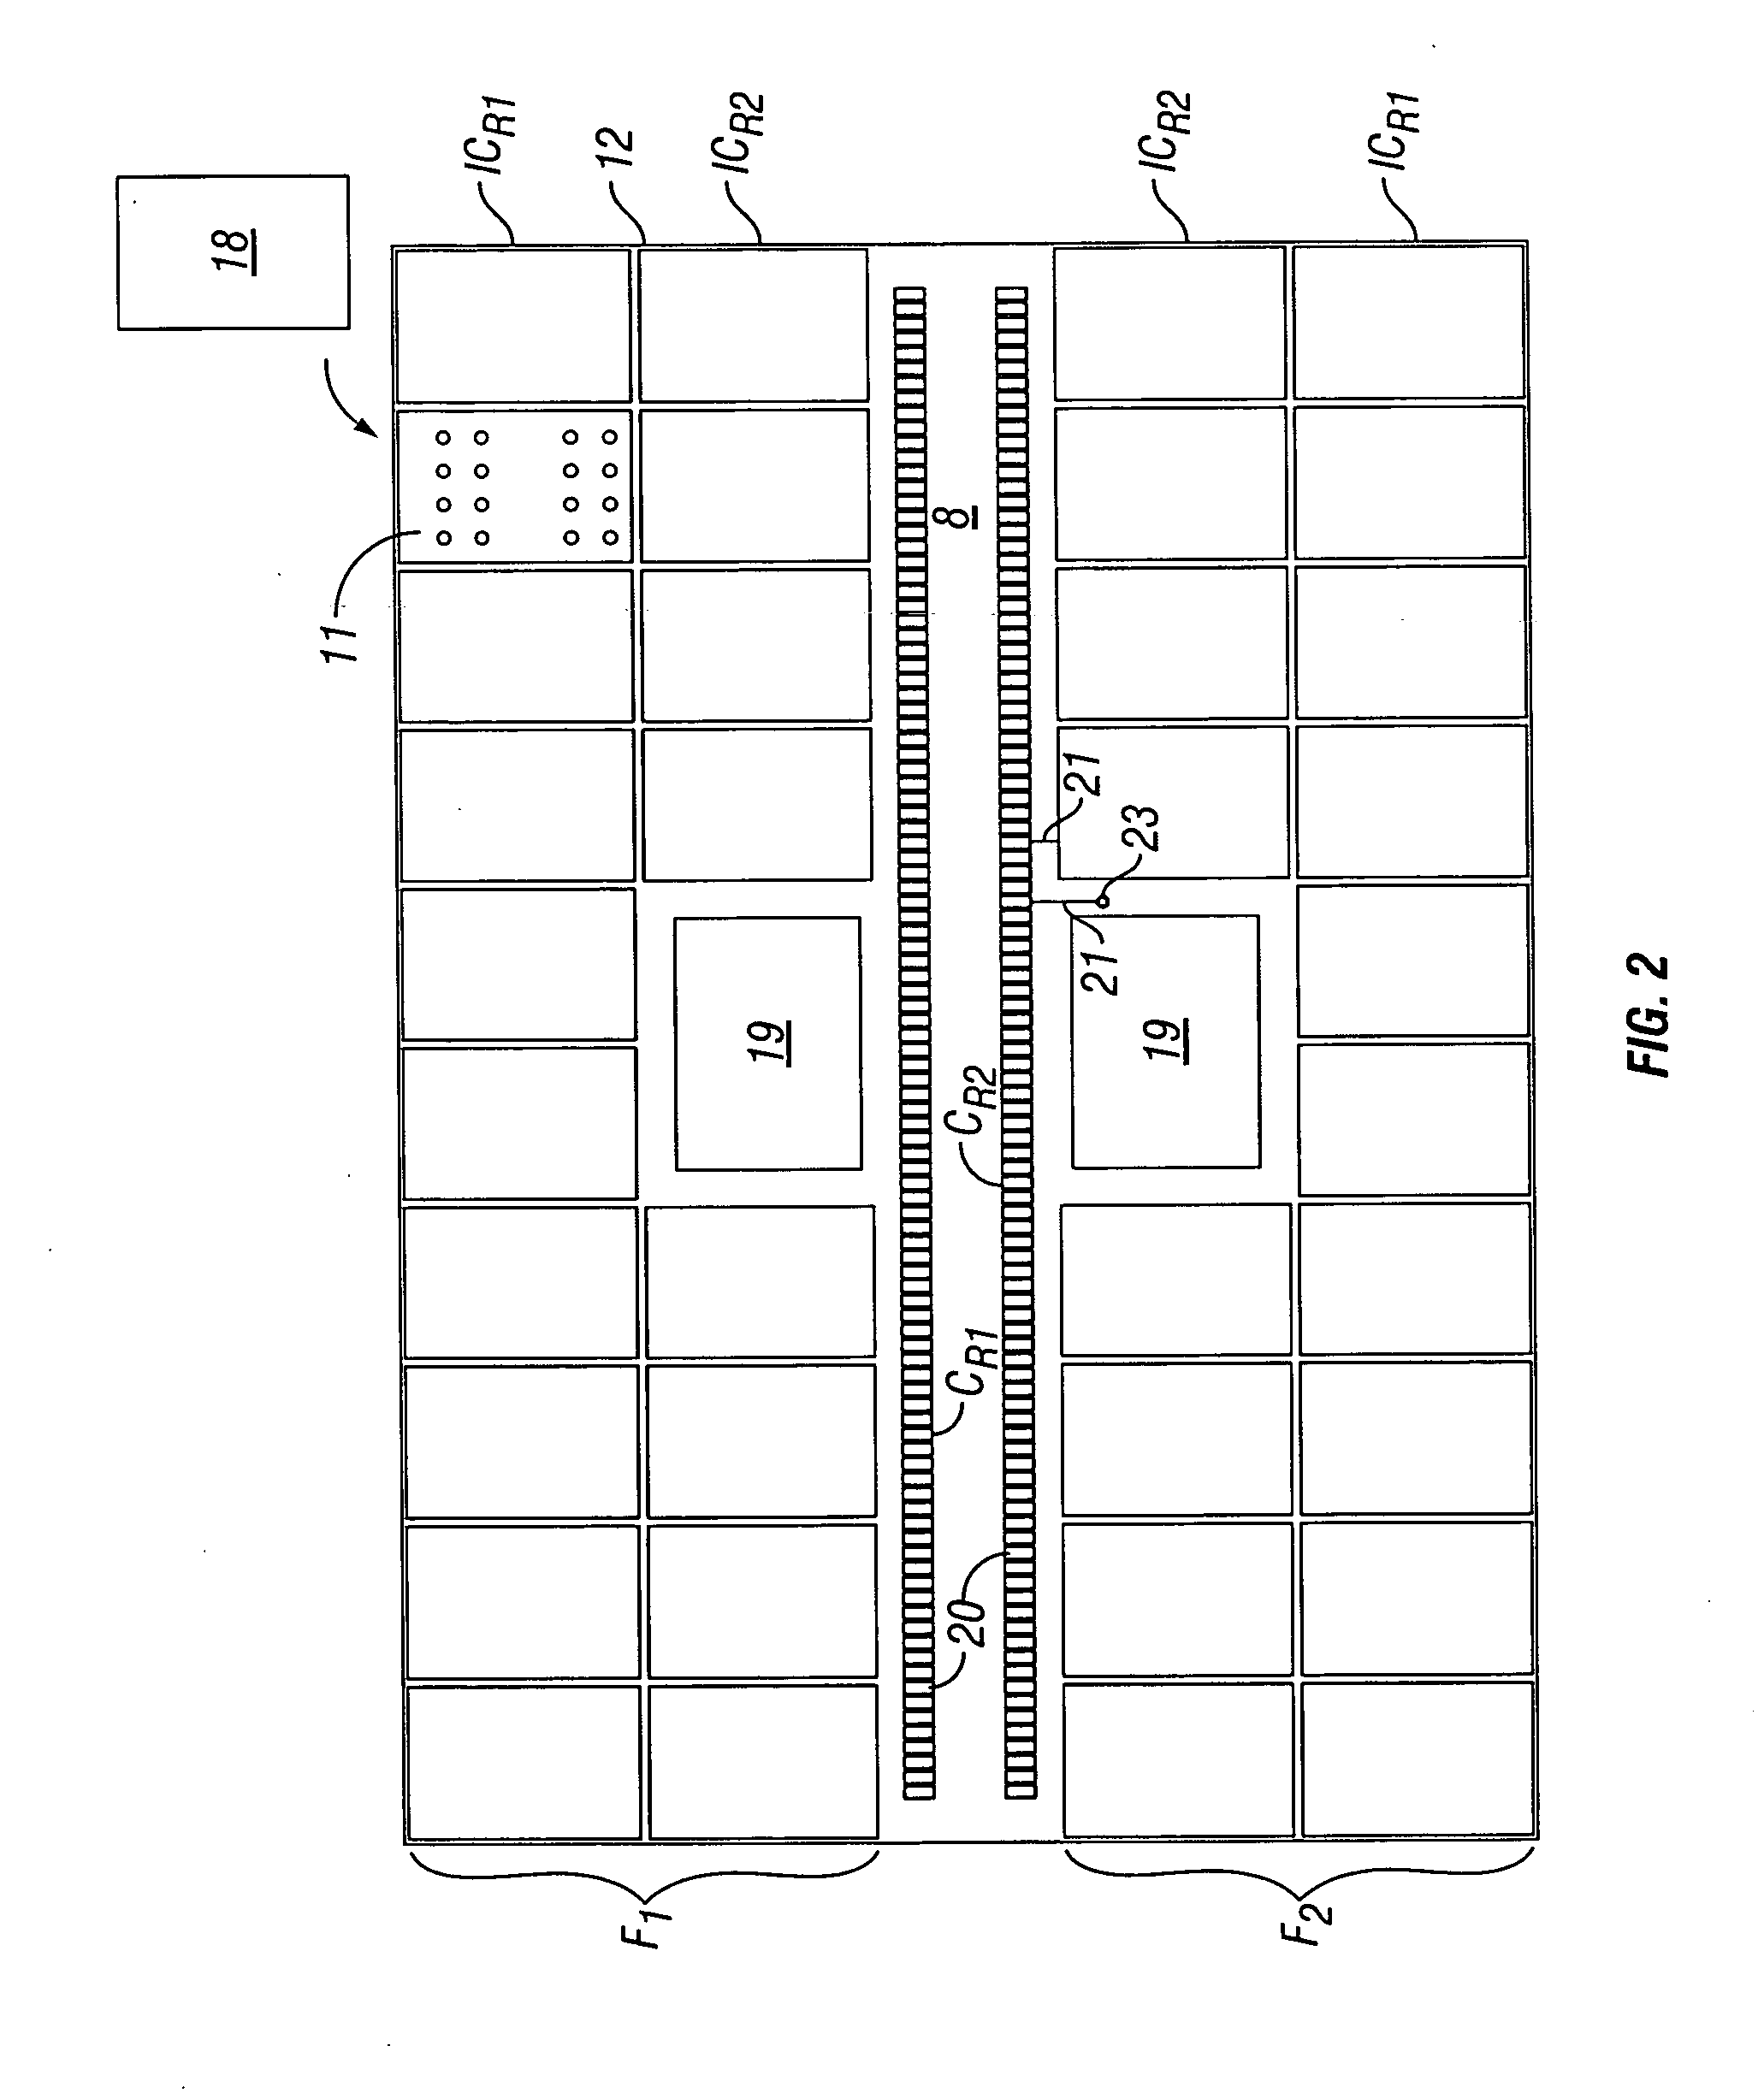 Thin module system and method